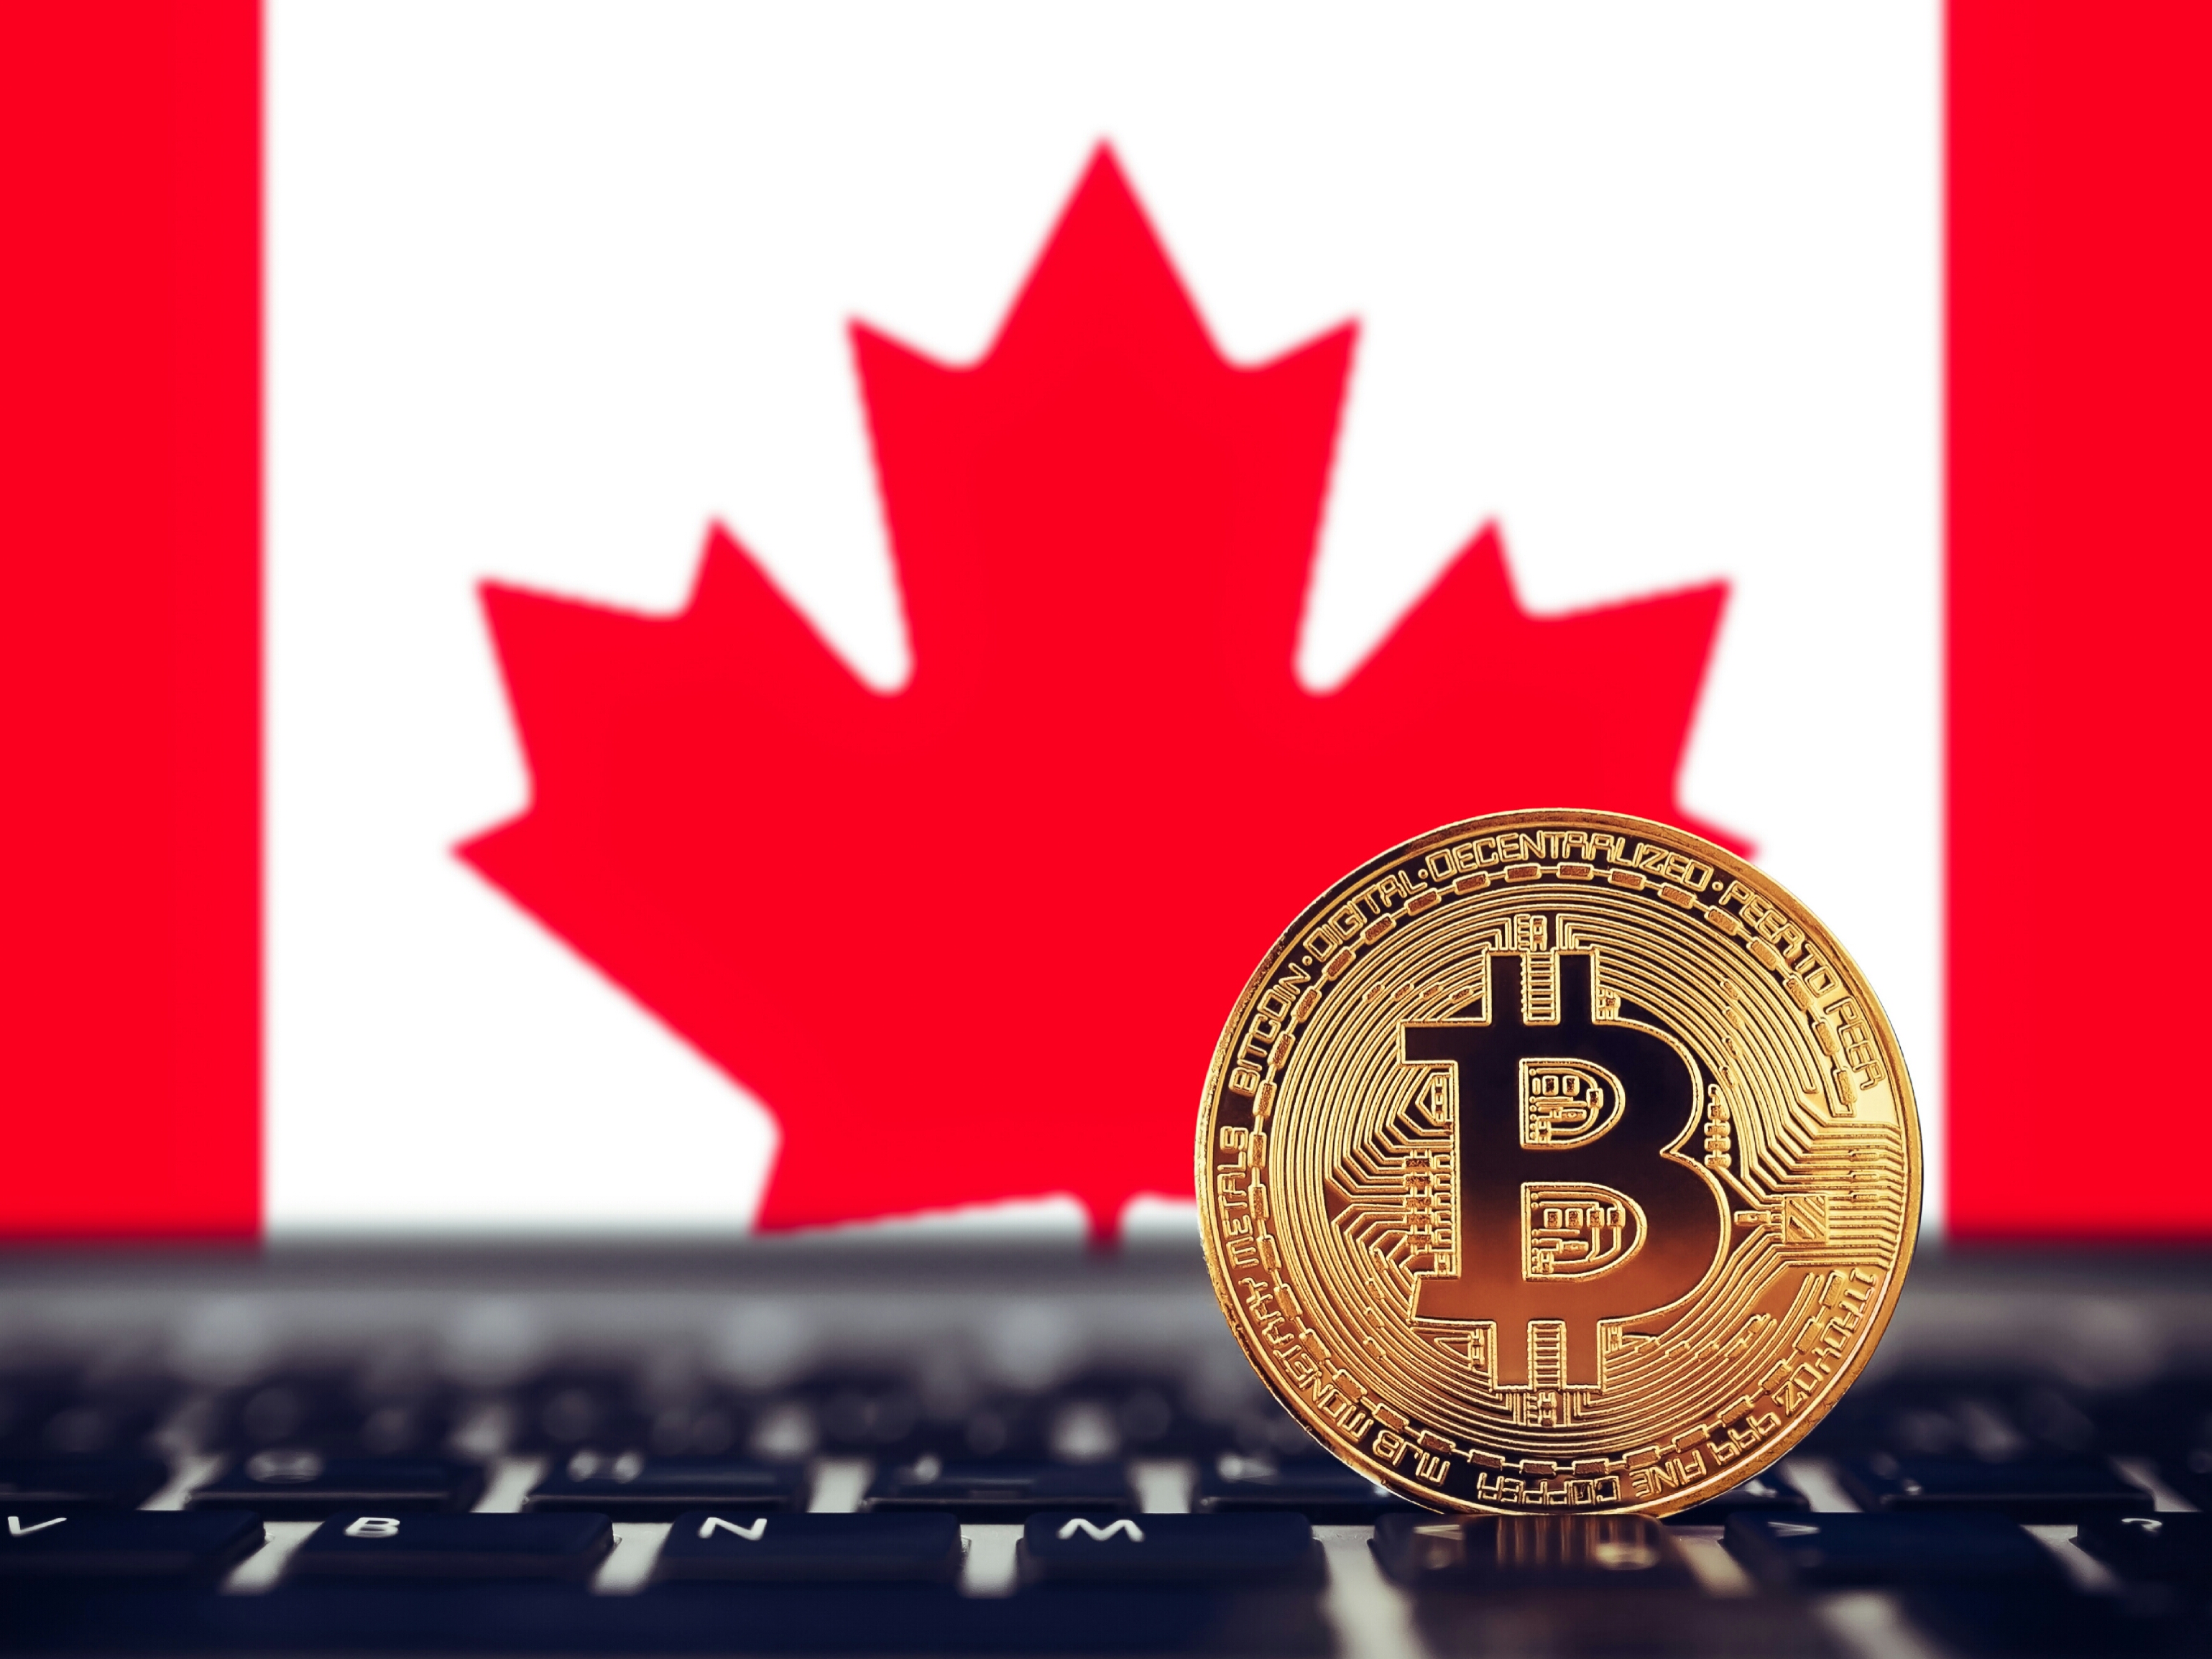 Canadian Capital Markets Regulators Mull New Cryptocurrency Rules